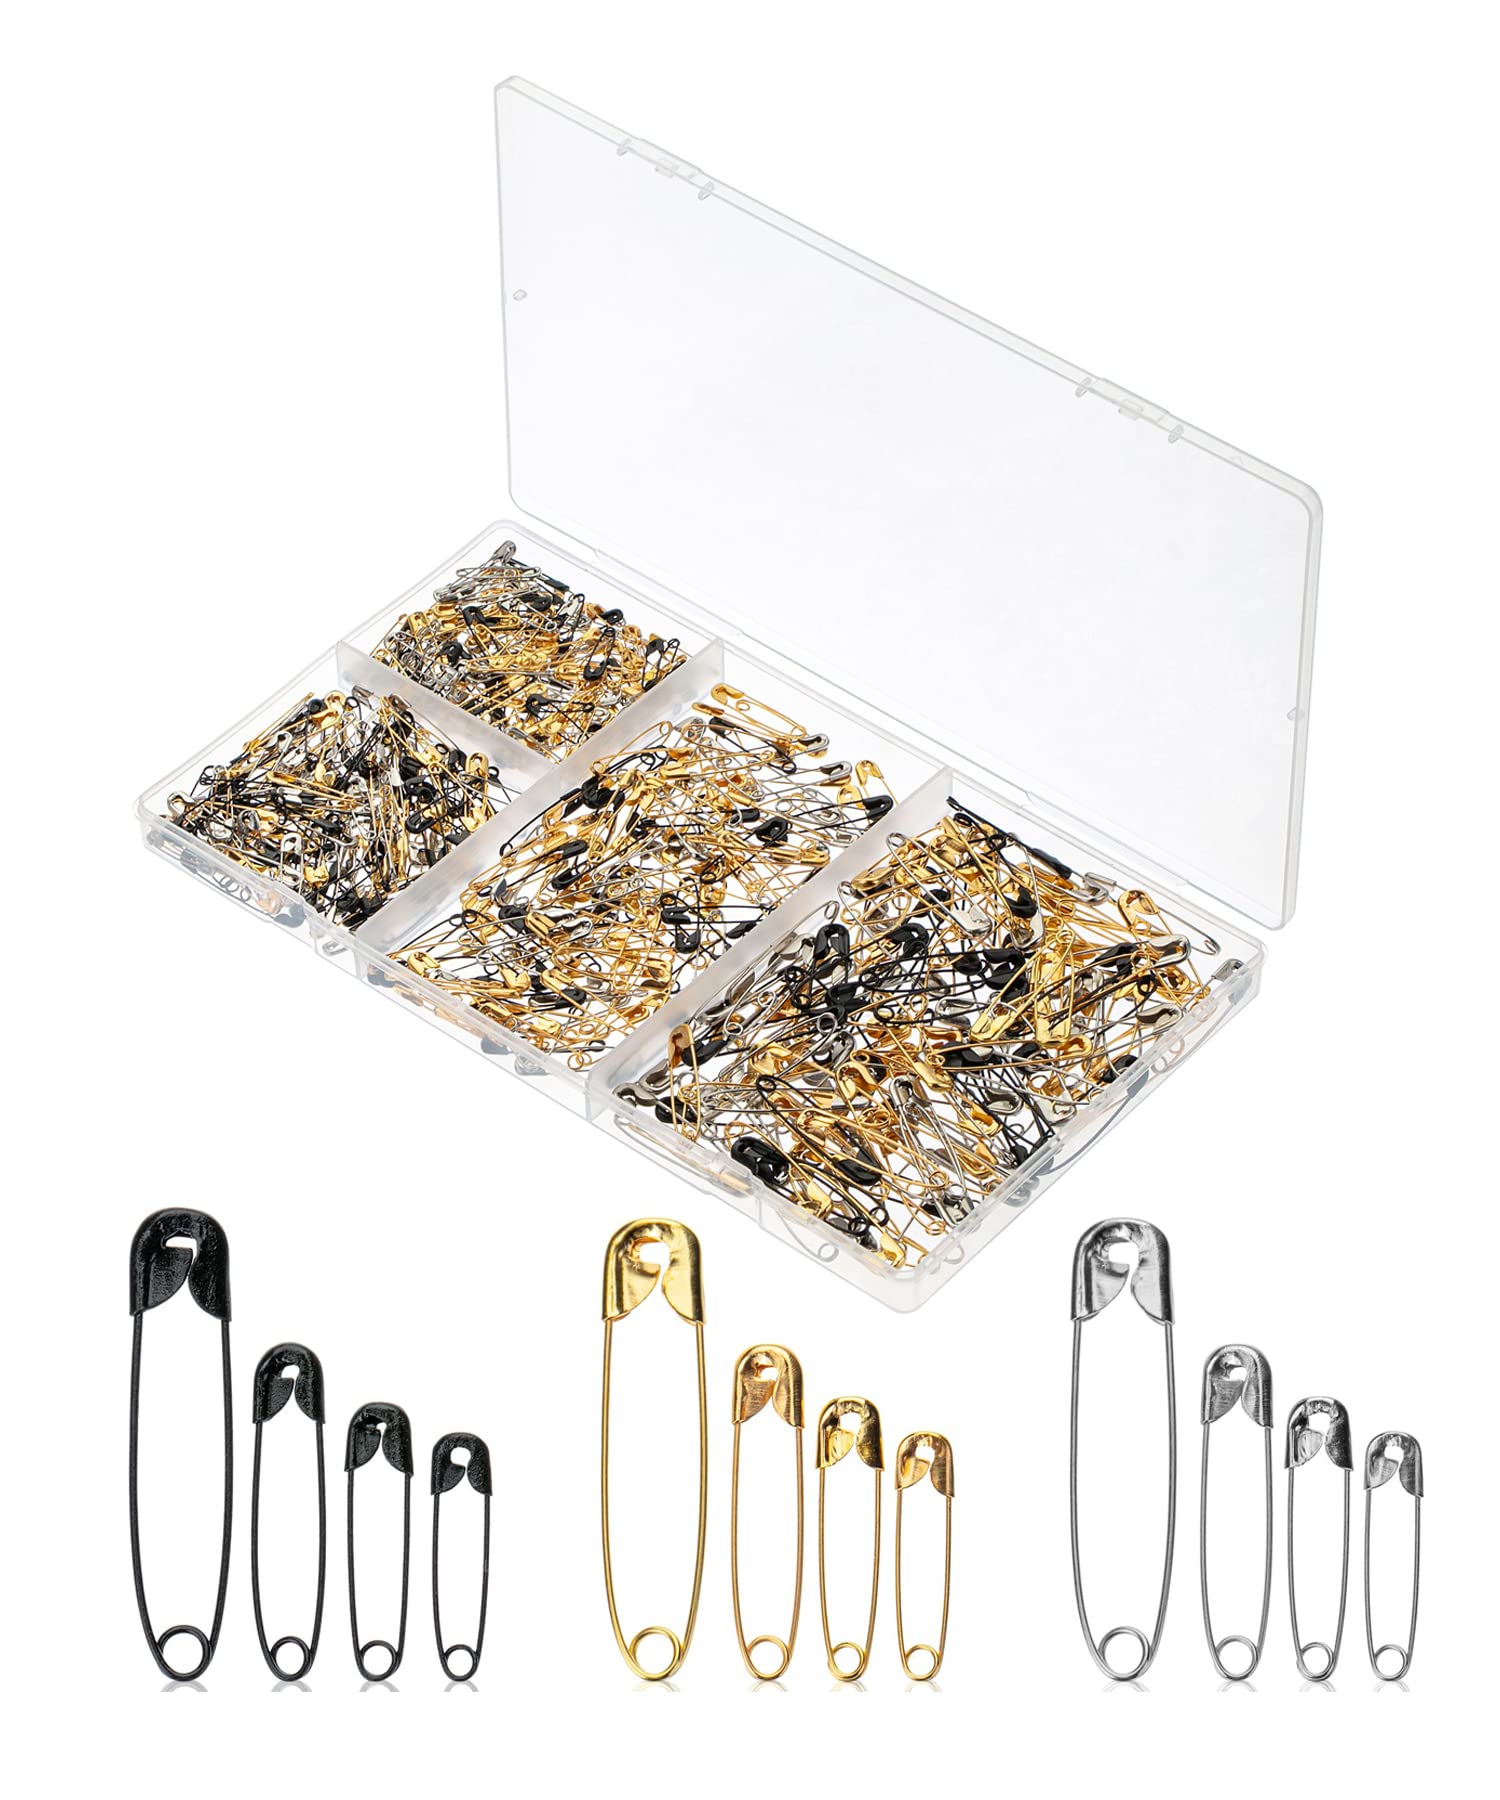 Gold Color Safety Pins Commonly Used Fasten Clothing Isolated